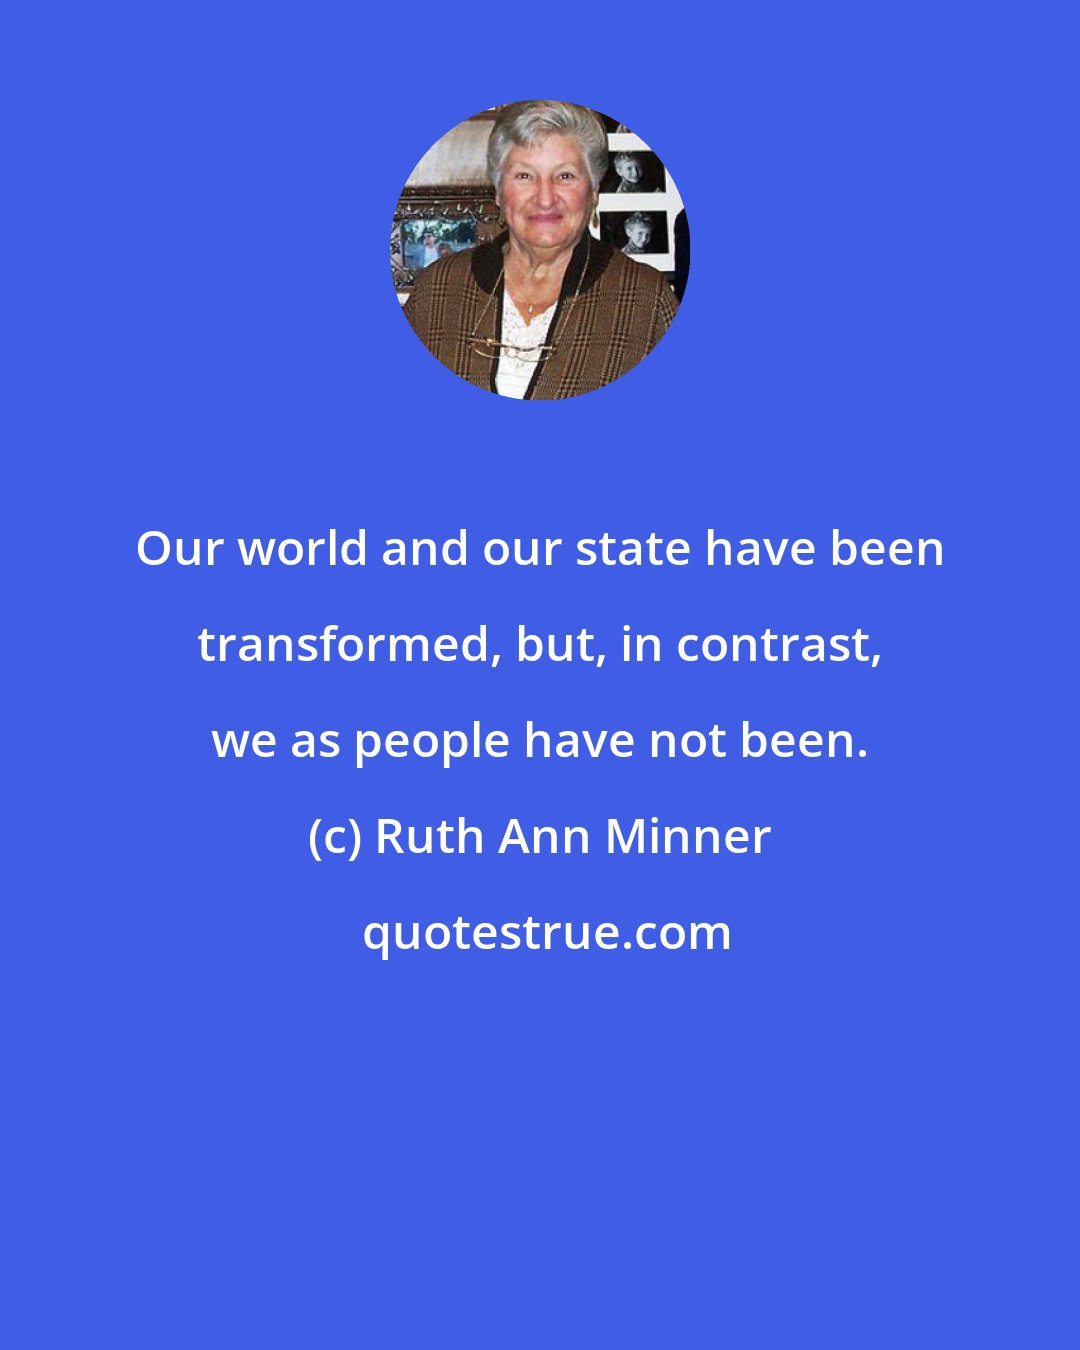 Ruth Ann Minner: Our world and our state have been transformed, but, in contrast, we as people have not been.